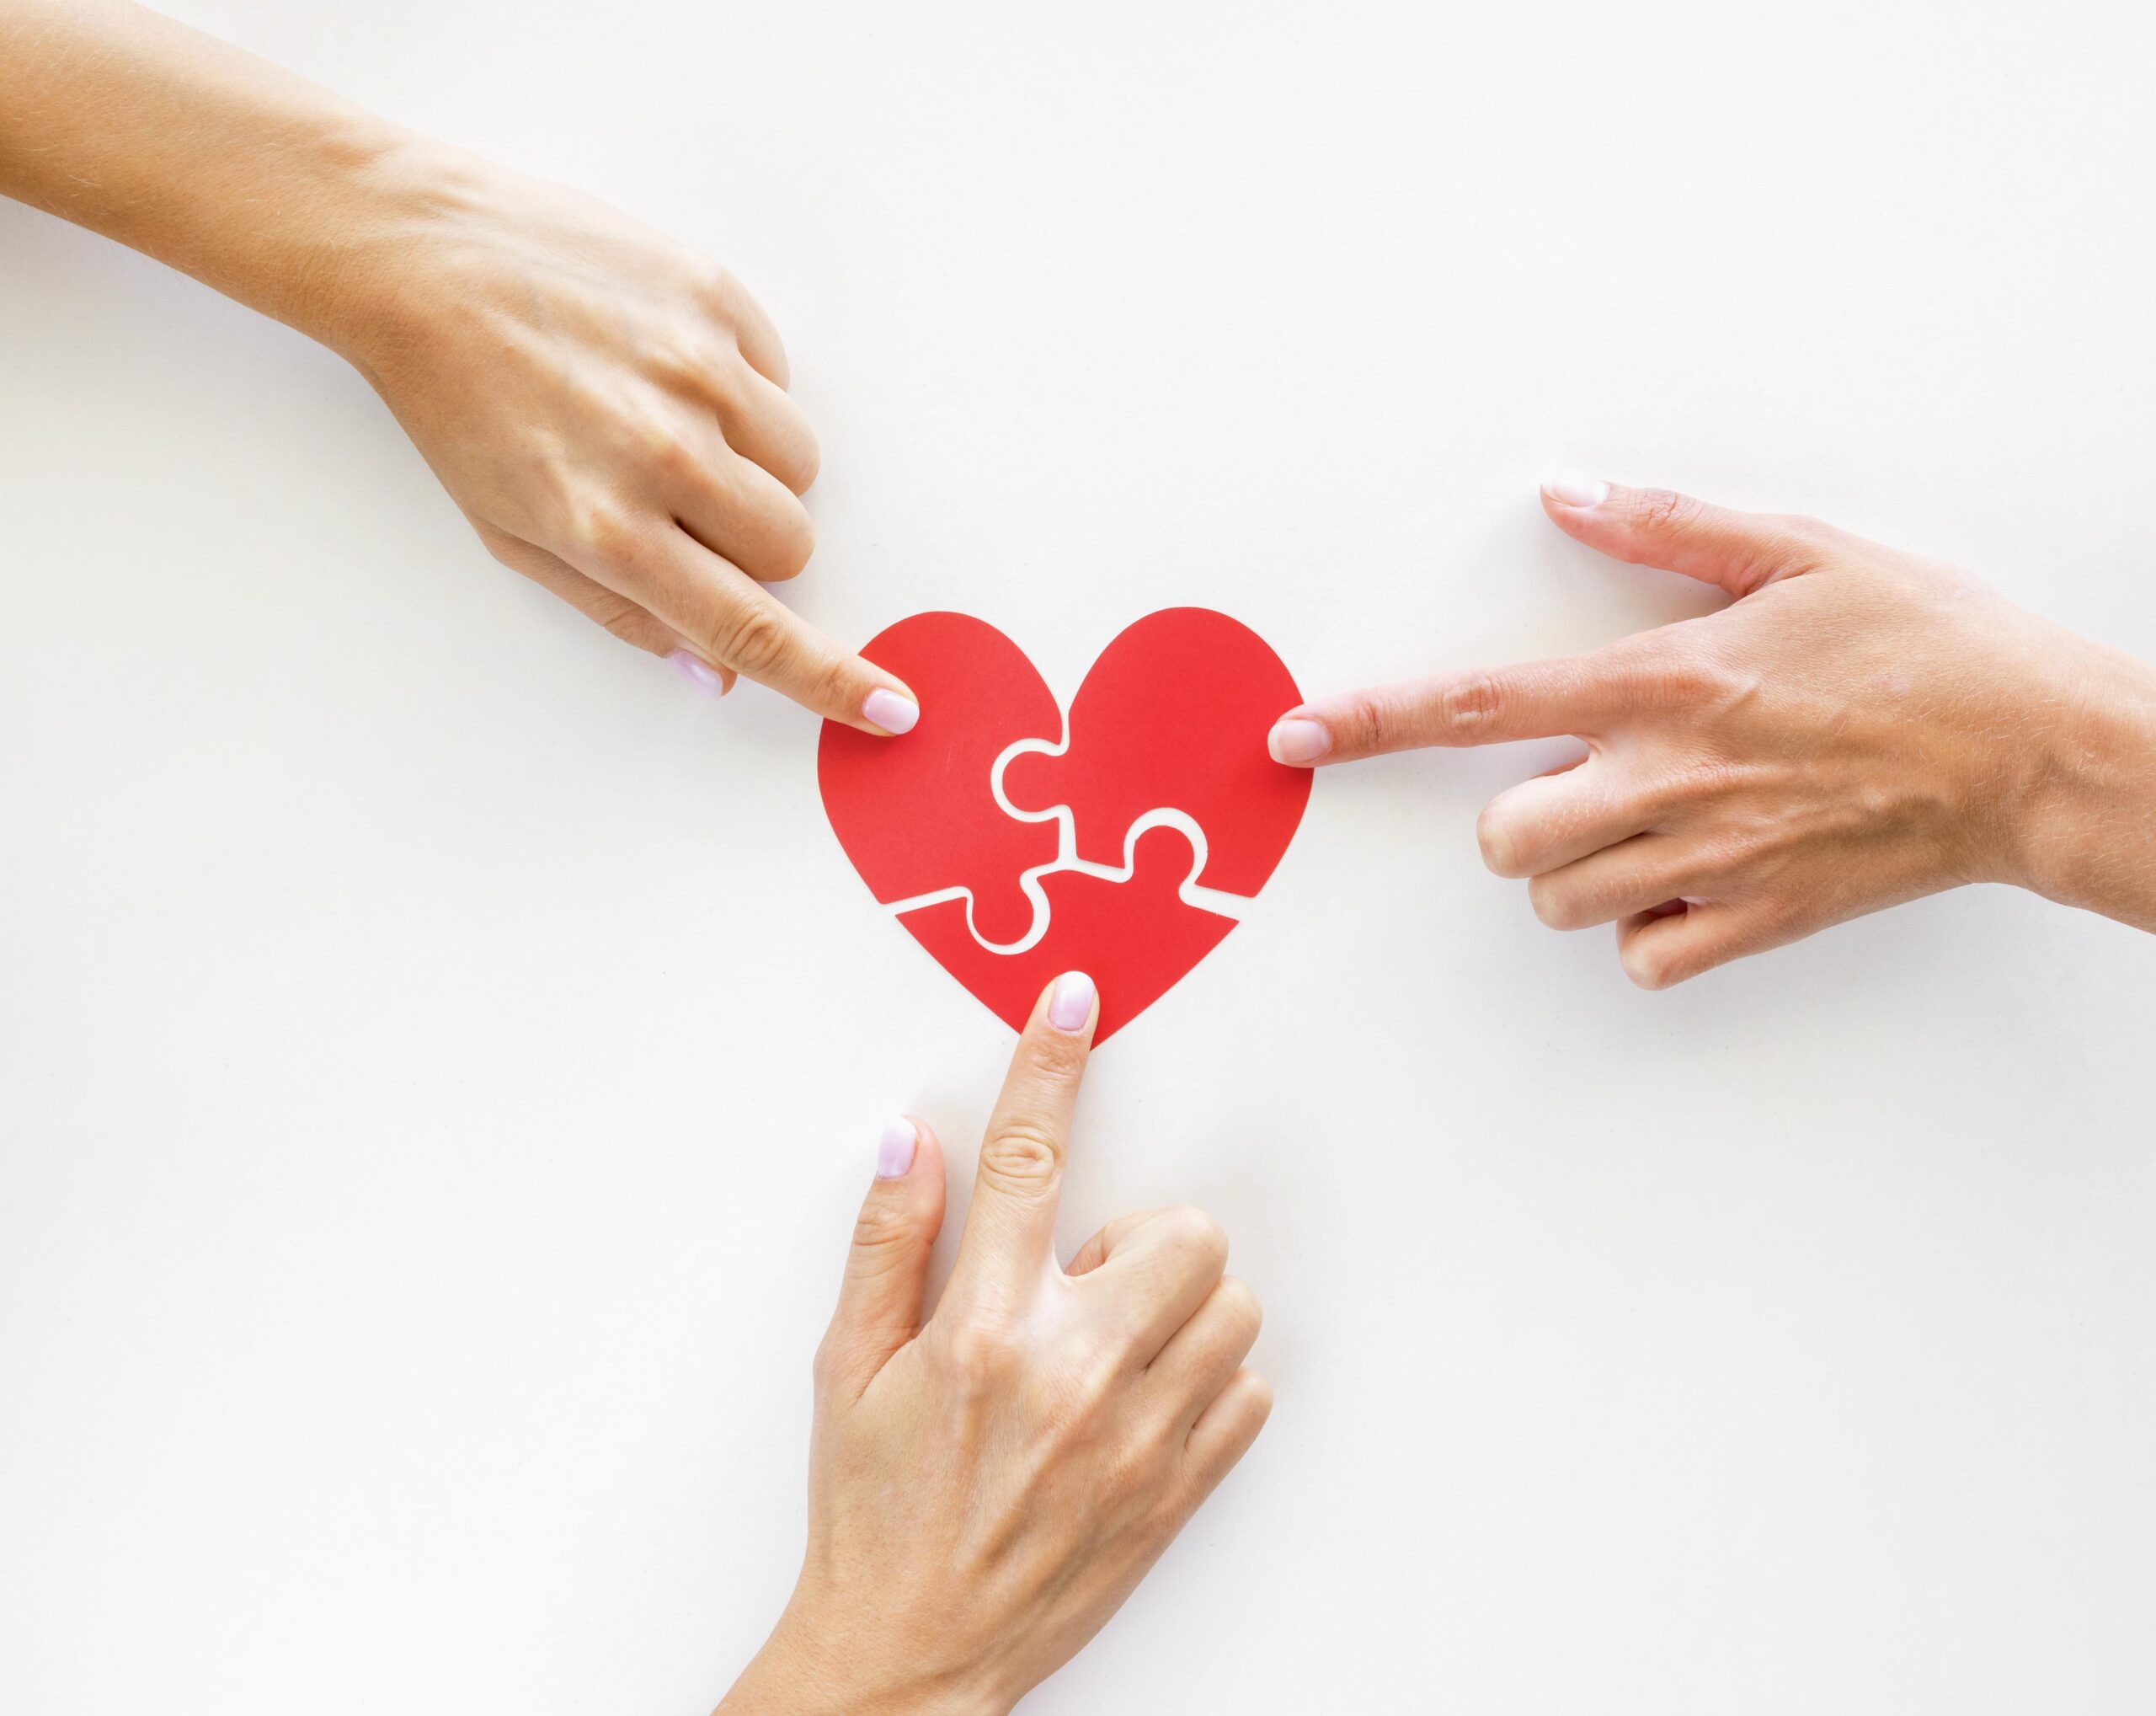 top-view-of-hands-touching-puzzle-heart-pieces